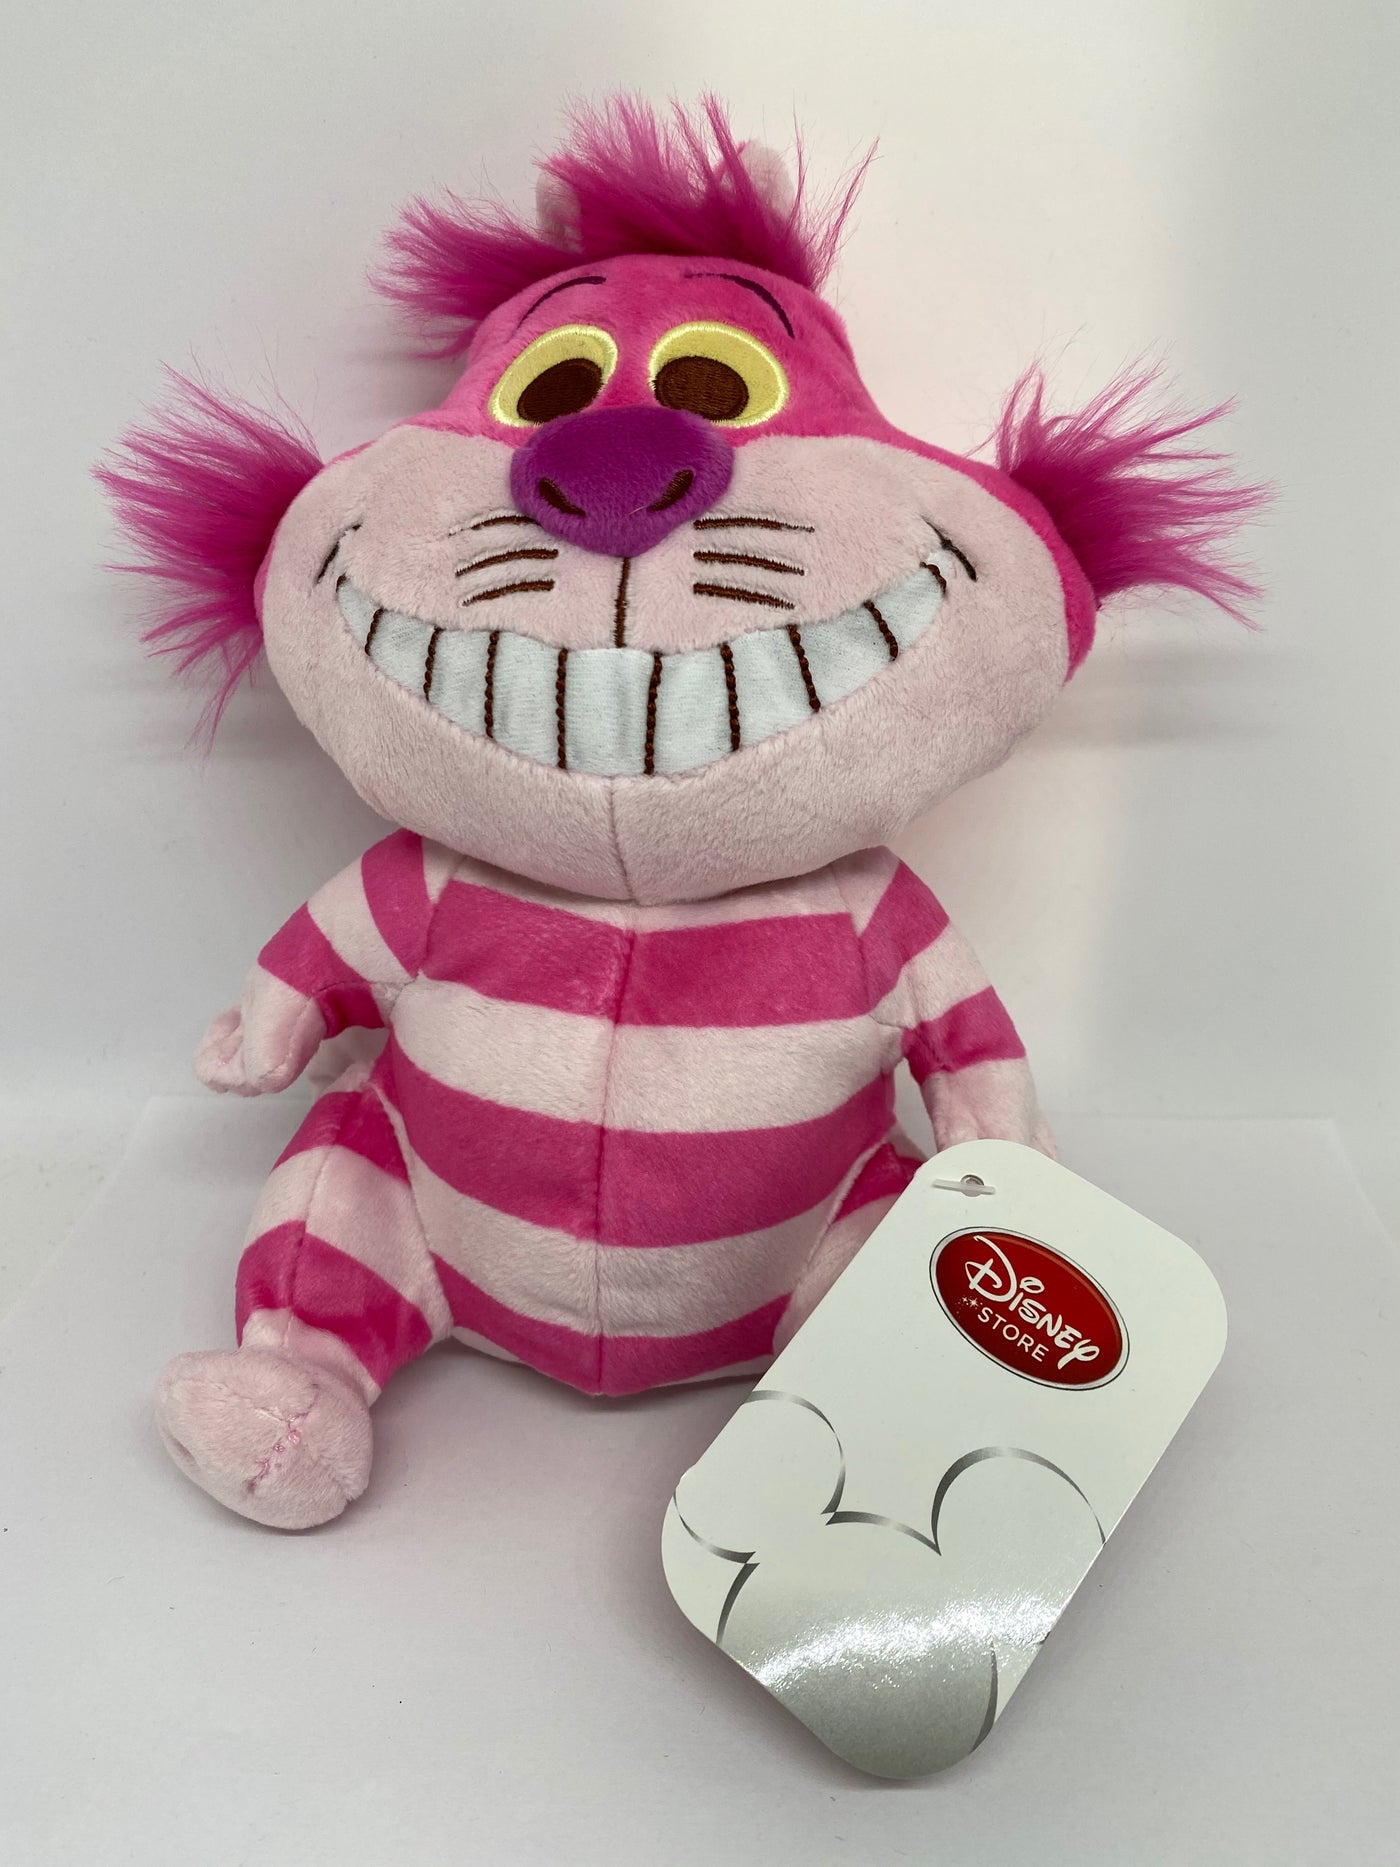 Disney Store Japan Alice in Wonderland Cheshire Cat Plush New with Tag